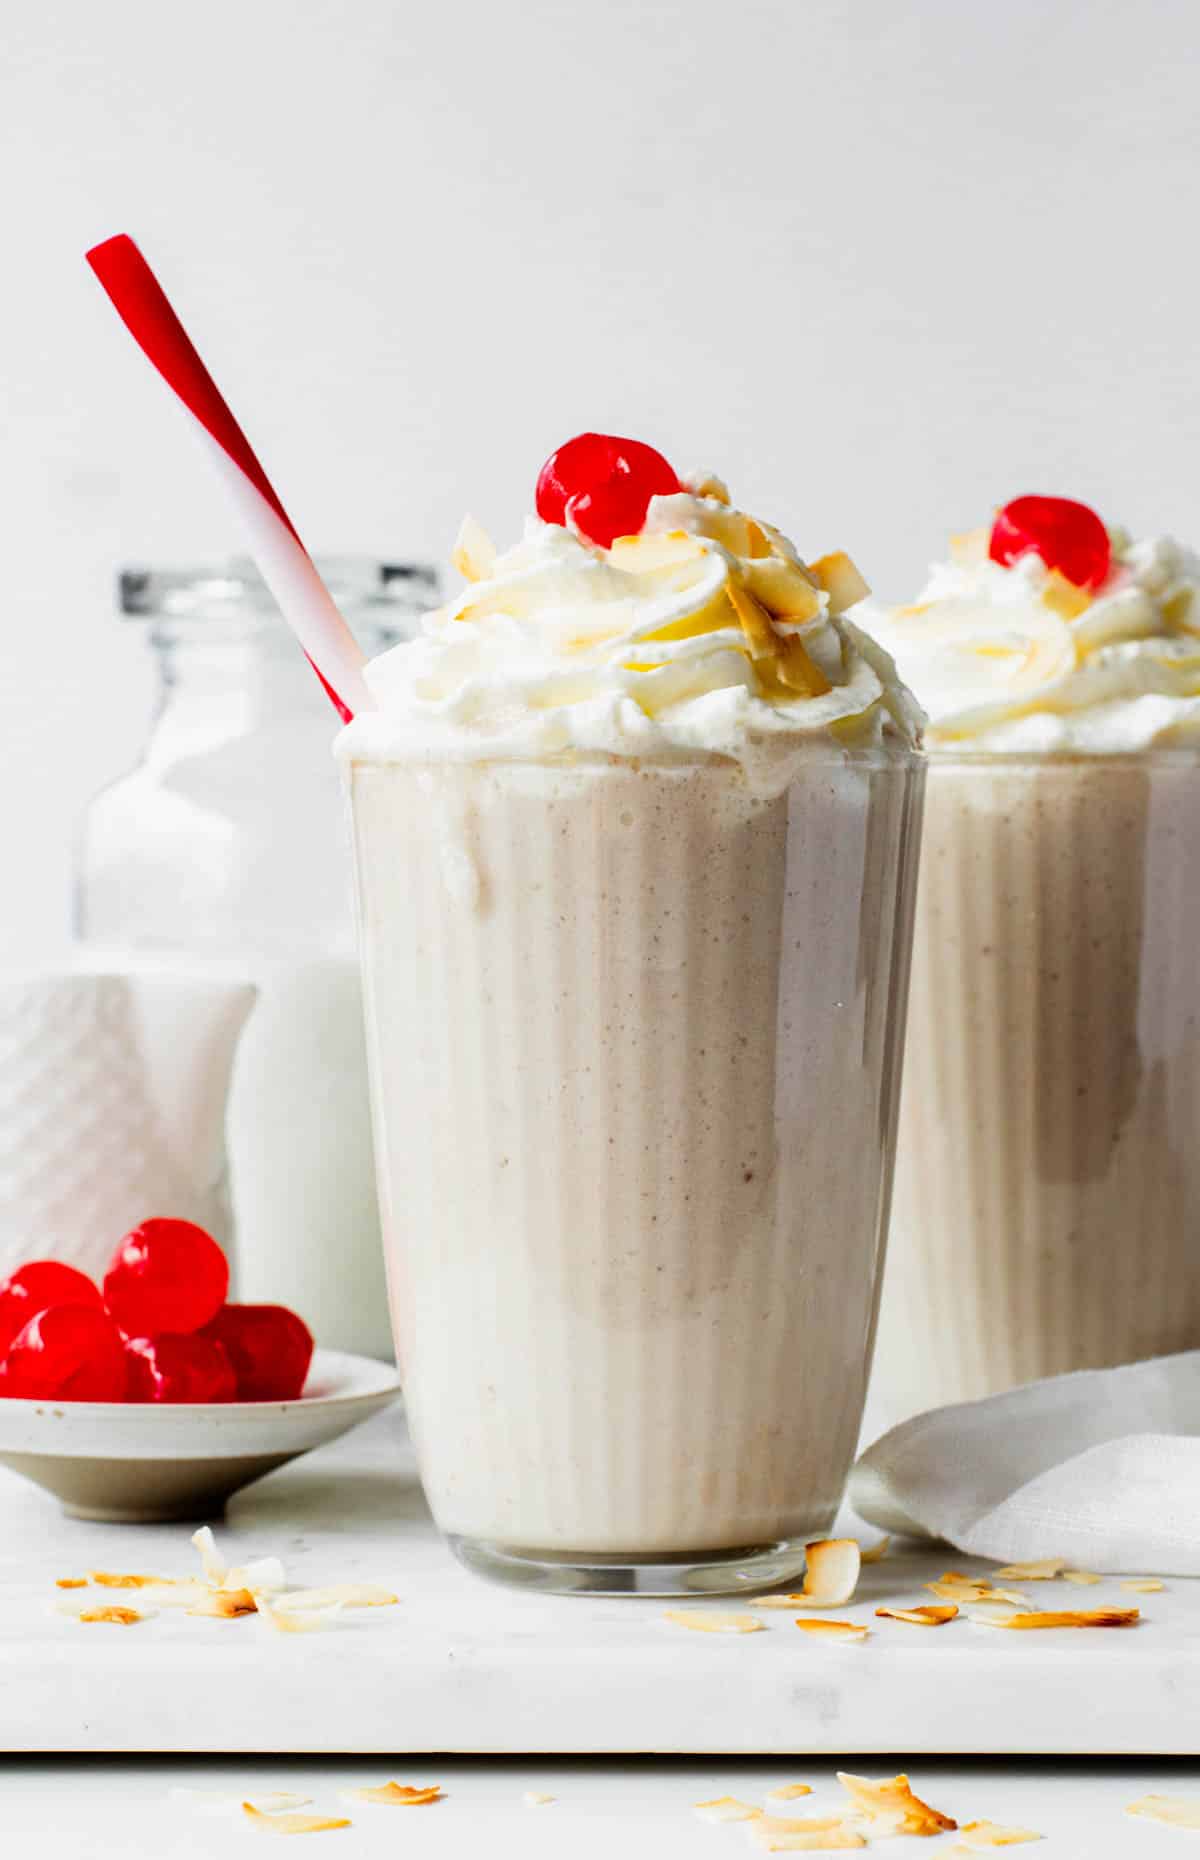 Two milkshake glasses filled with coconut shakes, topped with whipped cream and cherries.